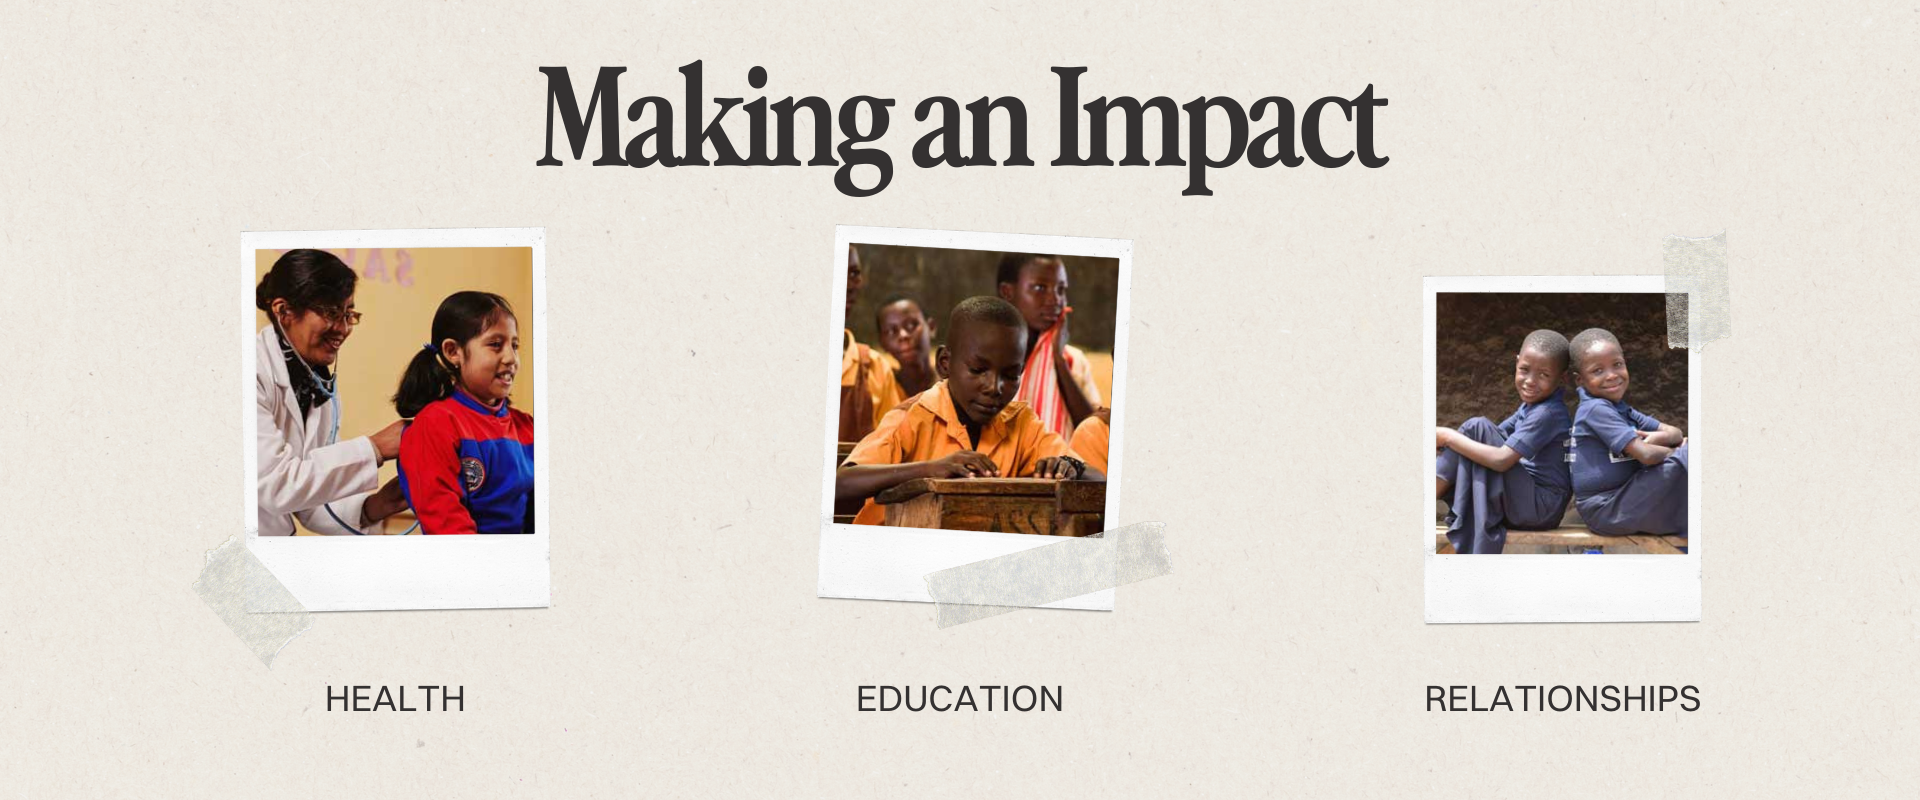 making an impact - health - education - relationships